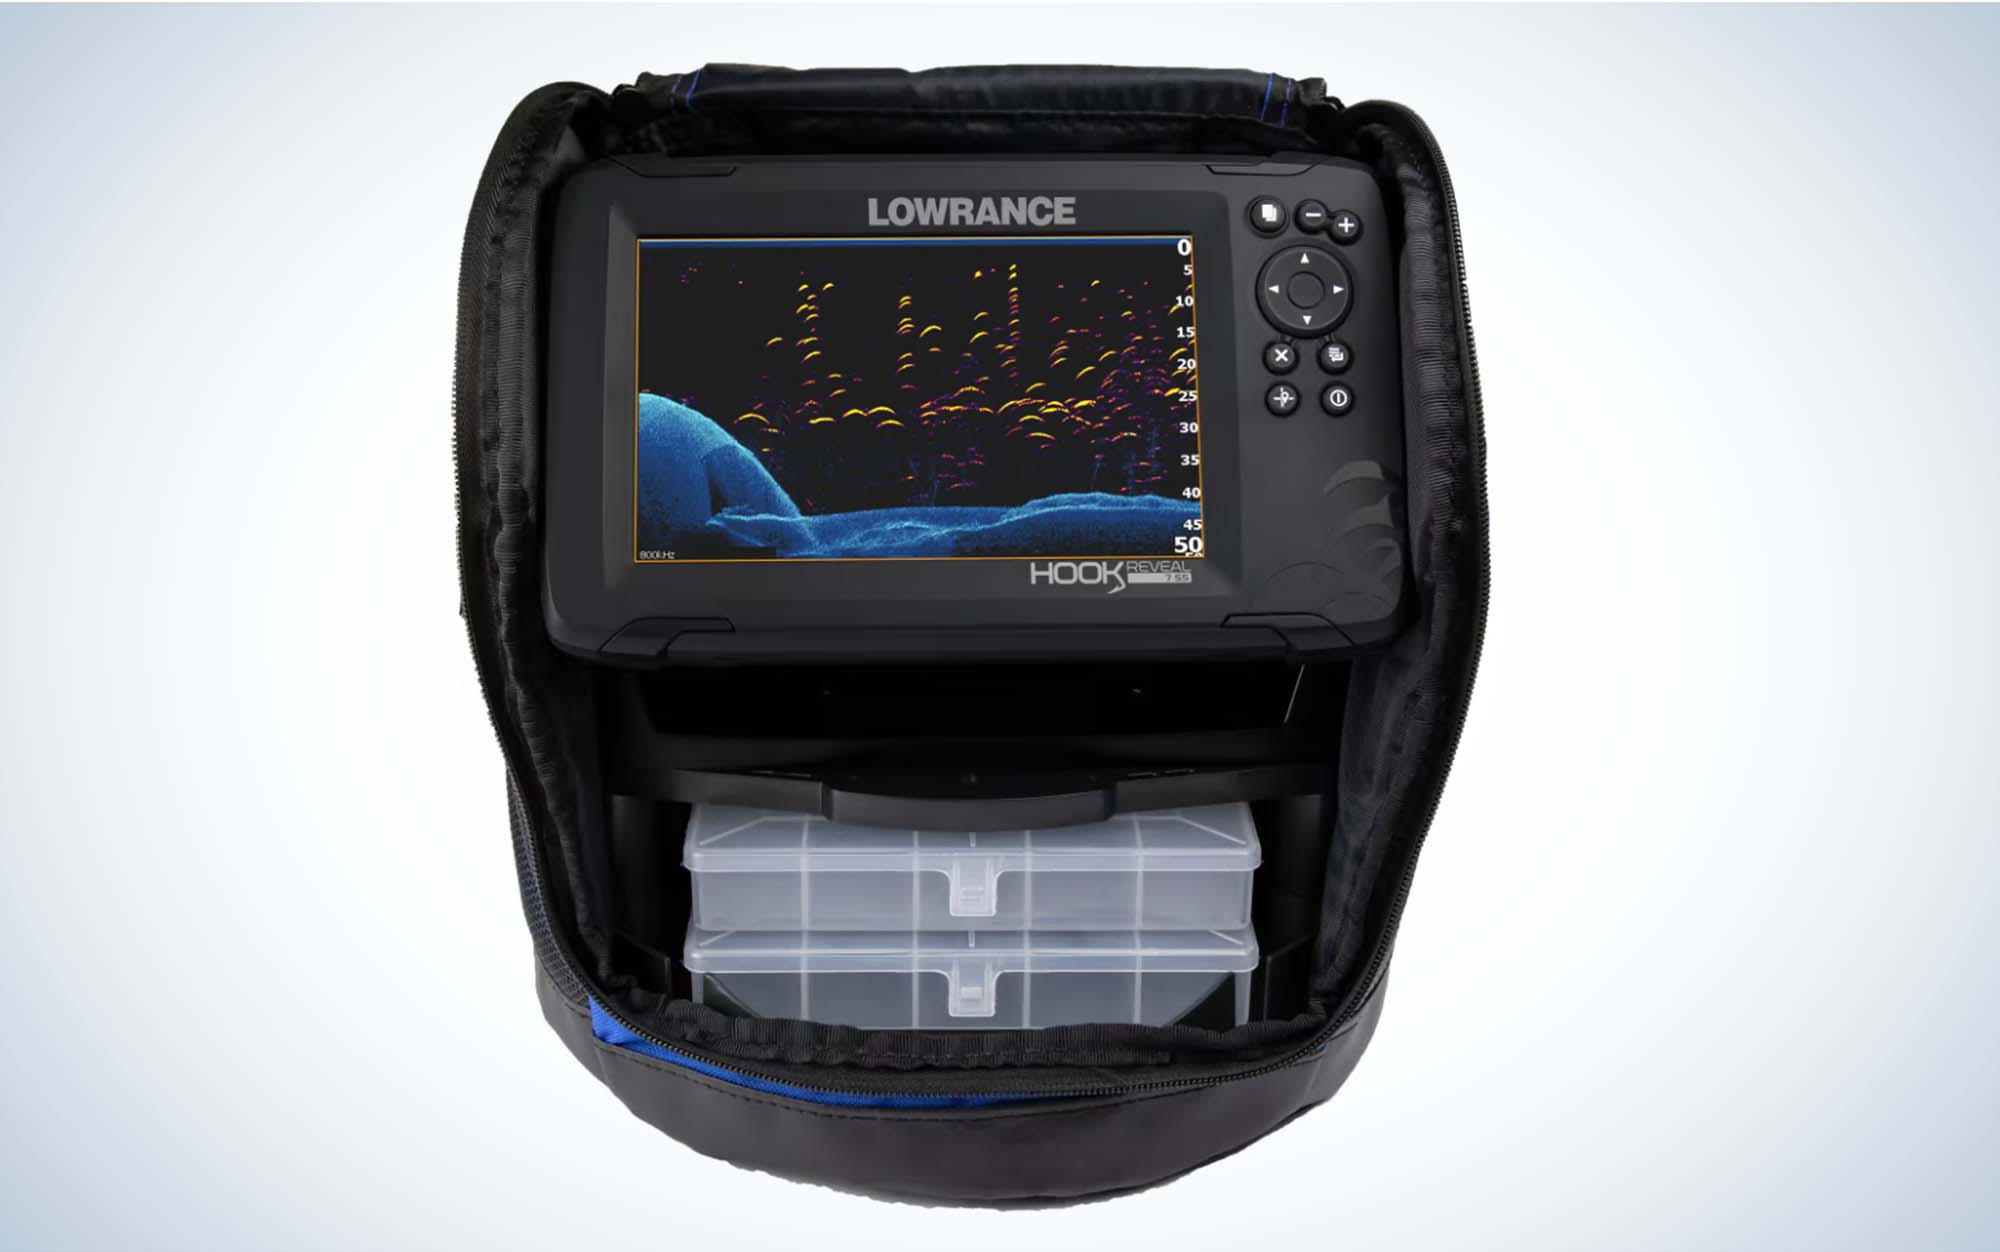 What is the Best Wireless Portable Fish Finder?